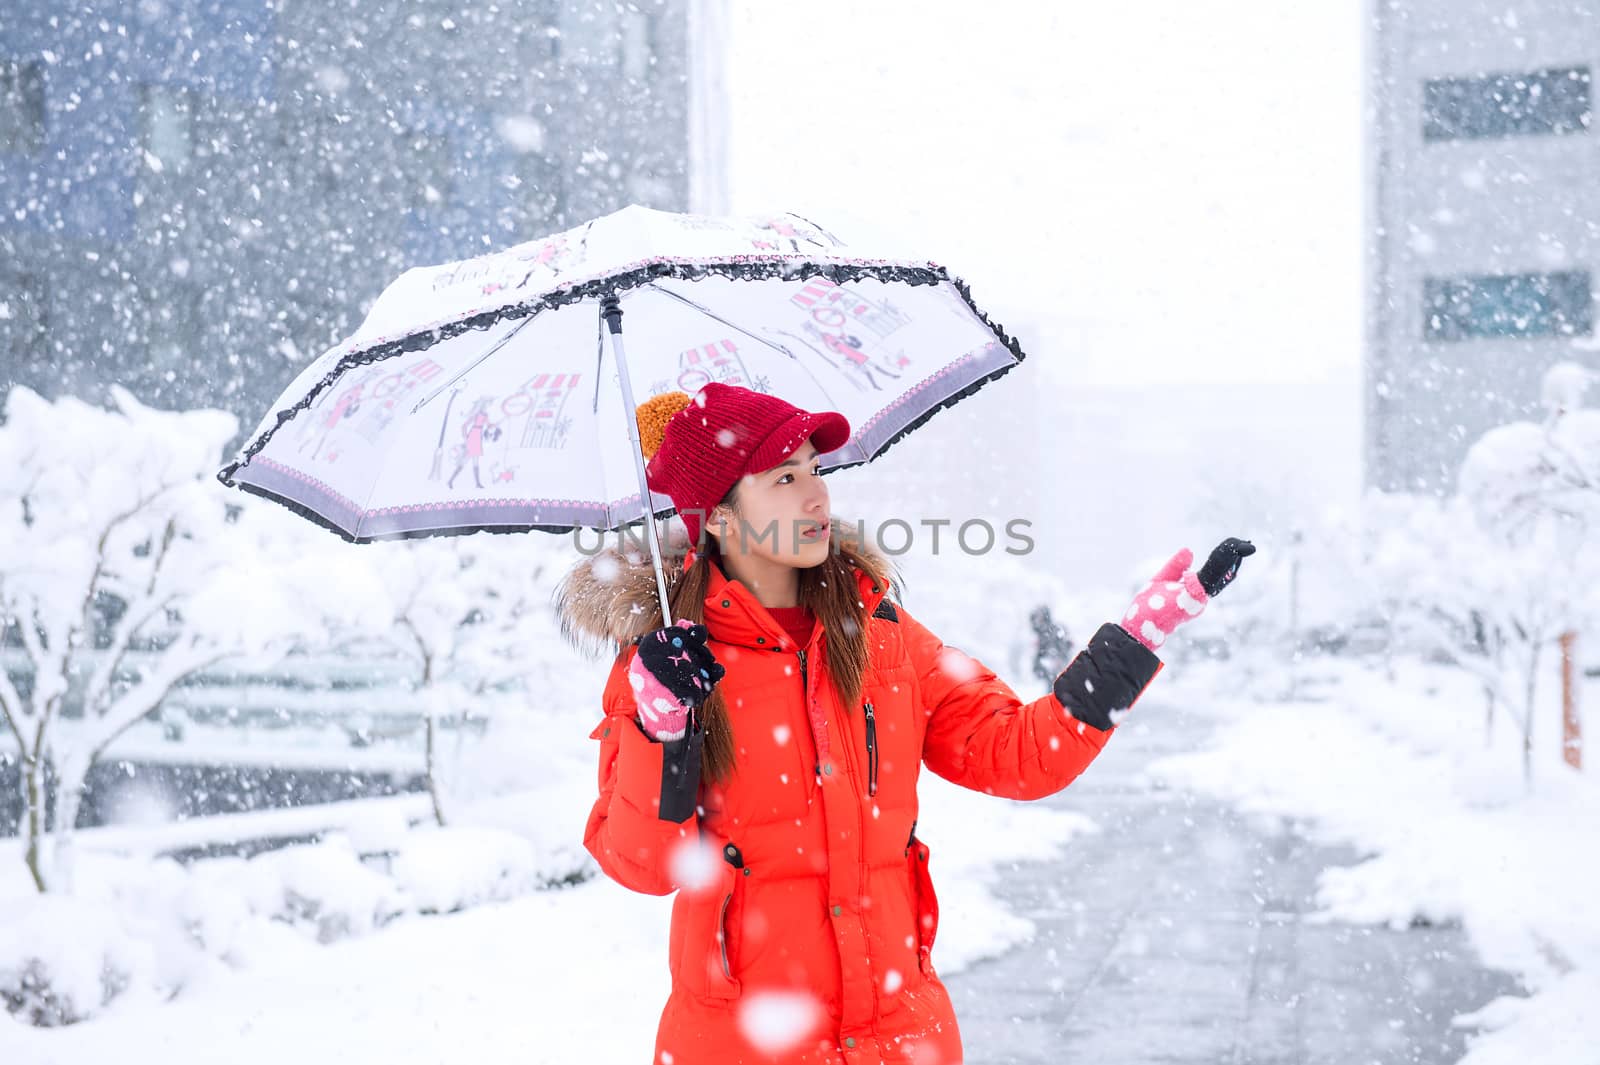 Snow falling on beautiful girl with umbrella in winter. by gutarphotoghaphy